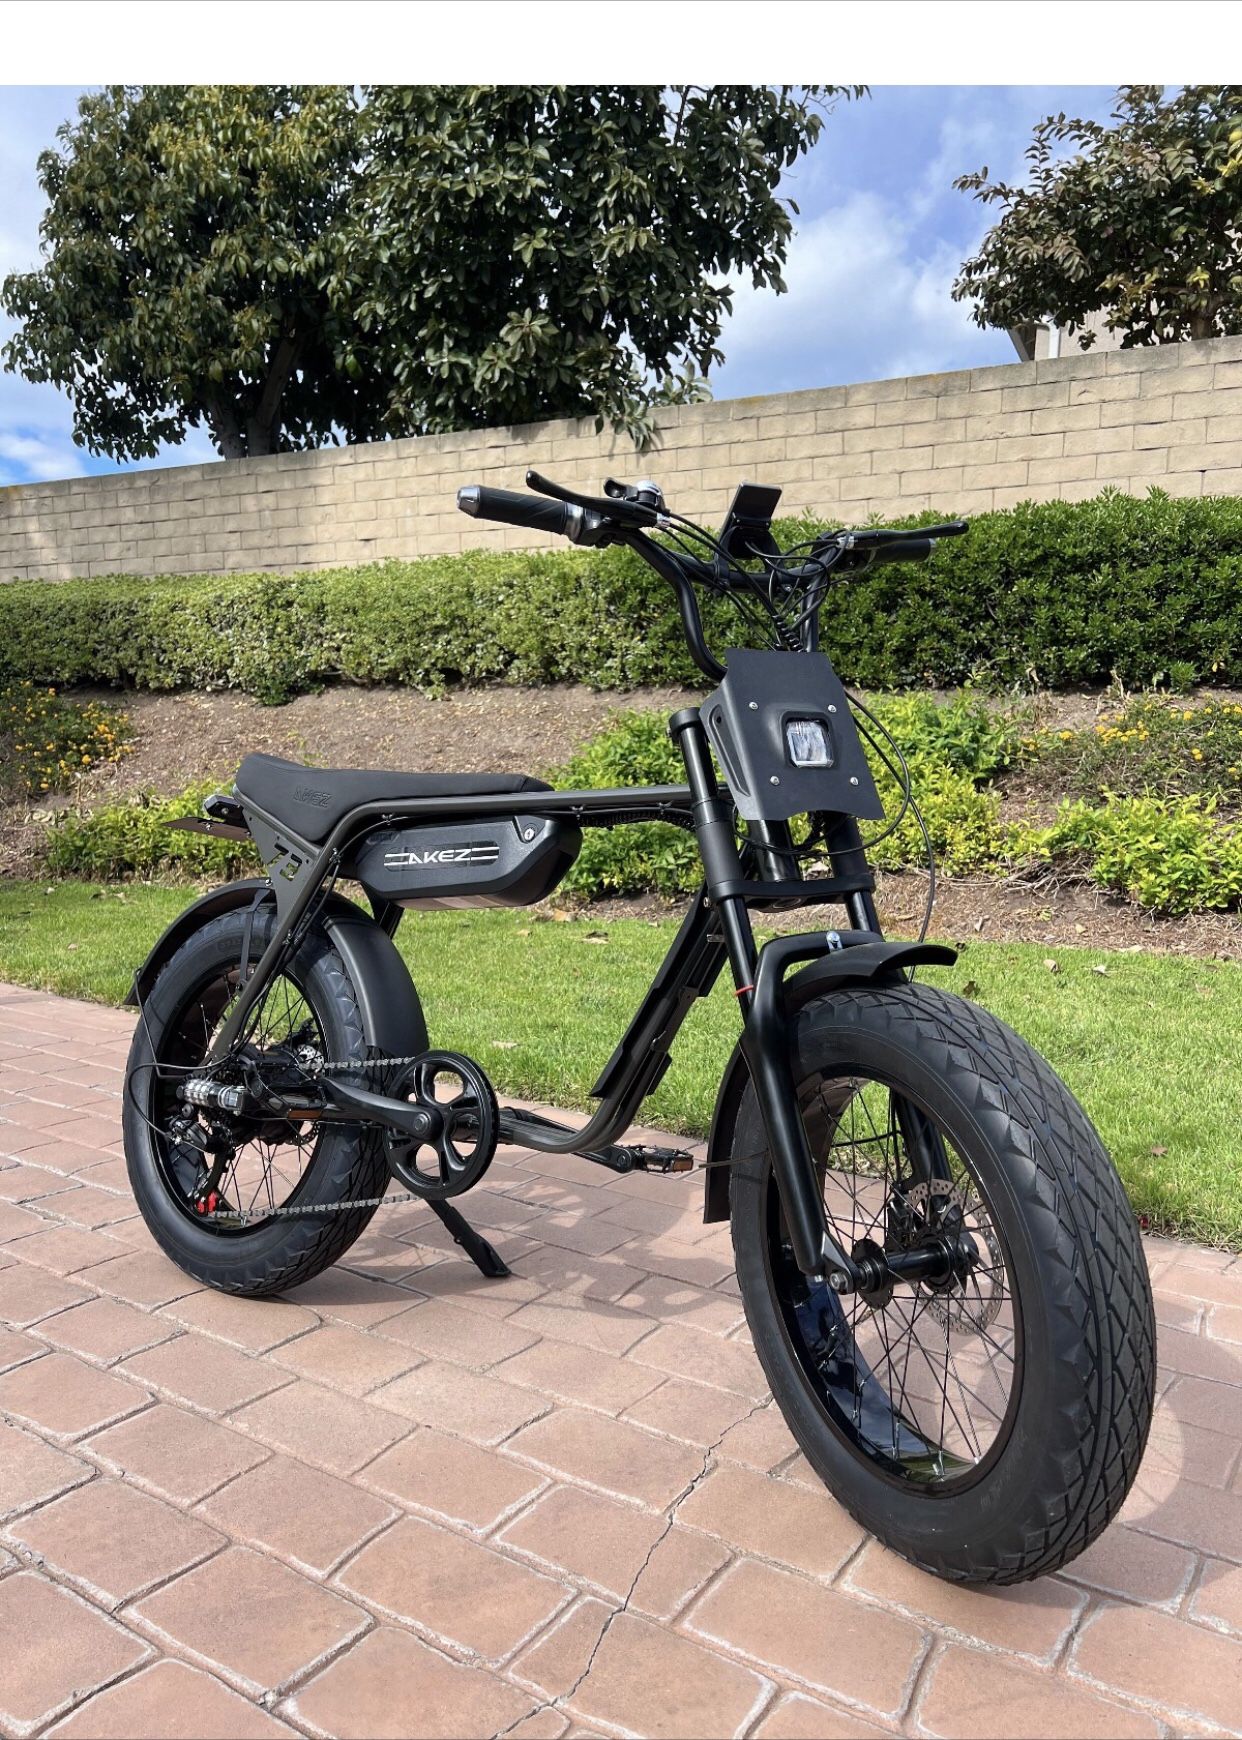 ⚡️⚡️$49 Down 750w Brand New Electric Bikes $49 down / 90 Day No Interest Delivery Available⚡️⚡️⚡️